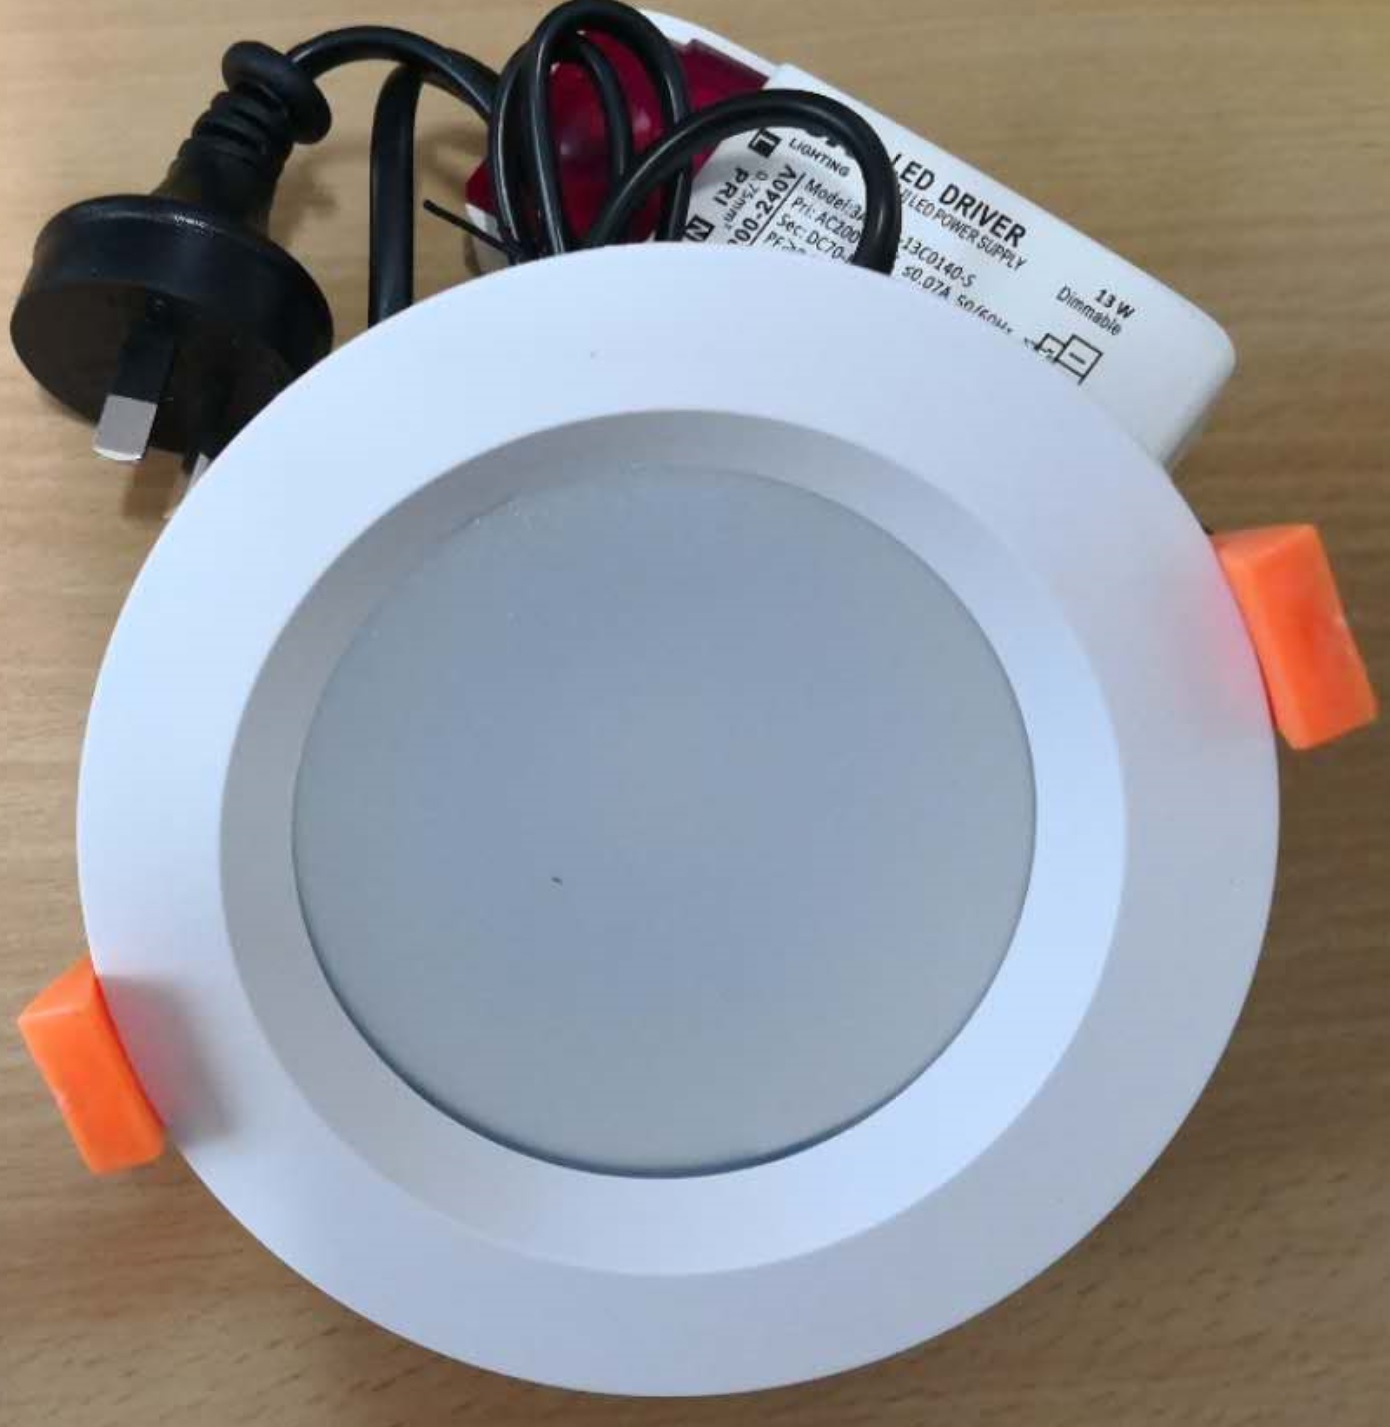 13w Dimmable LED Downlight with 5 Colour Selector Switch - 3000K,4000K,4500K,5000K,5700K